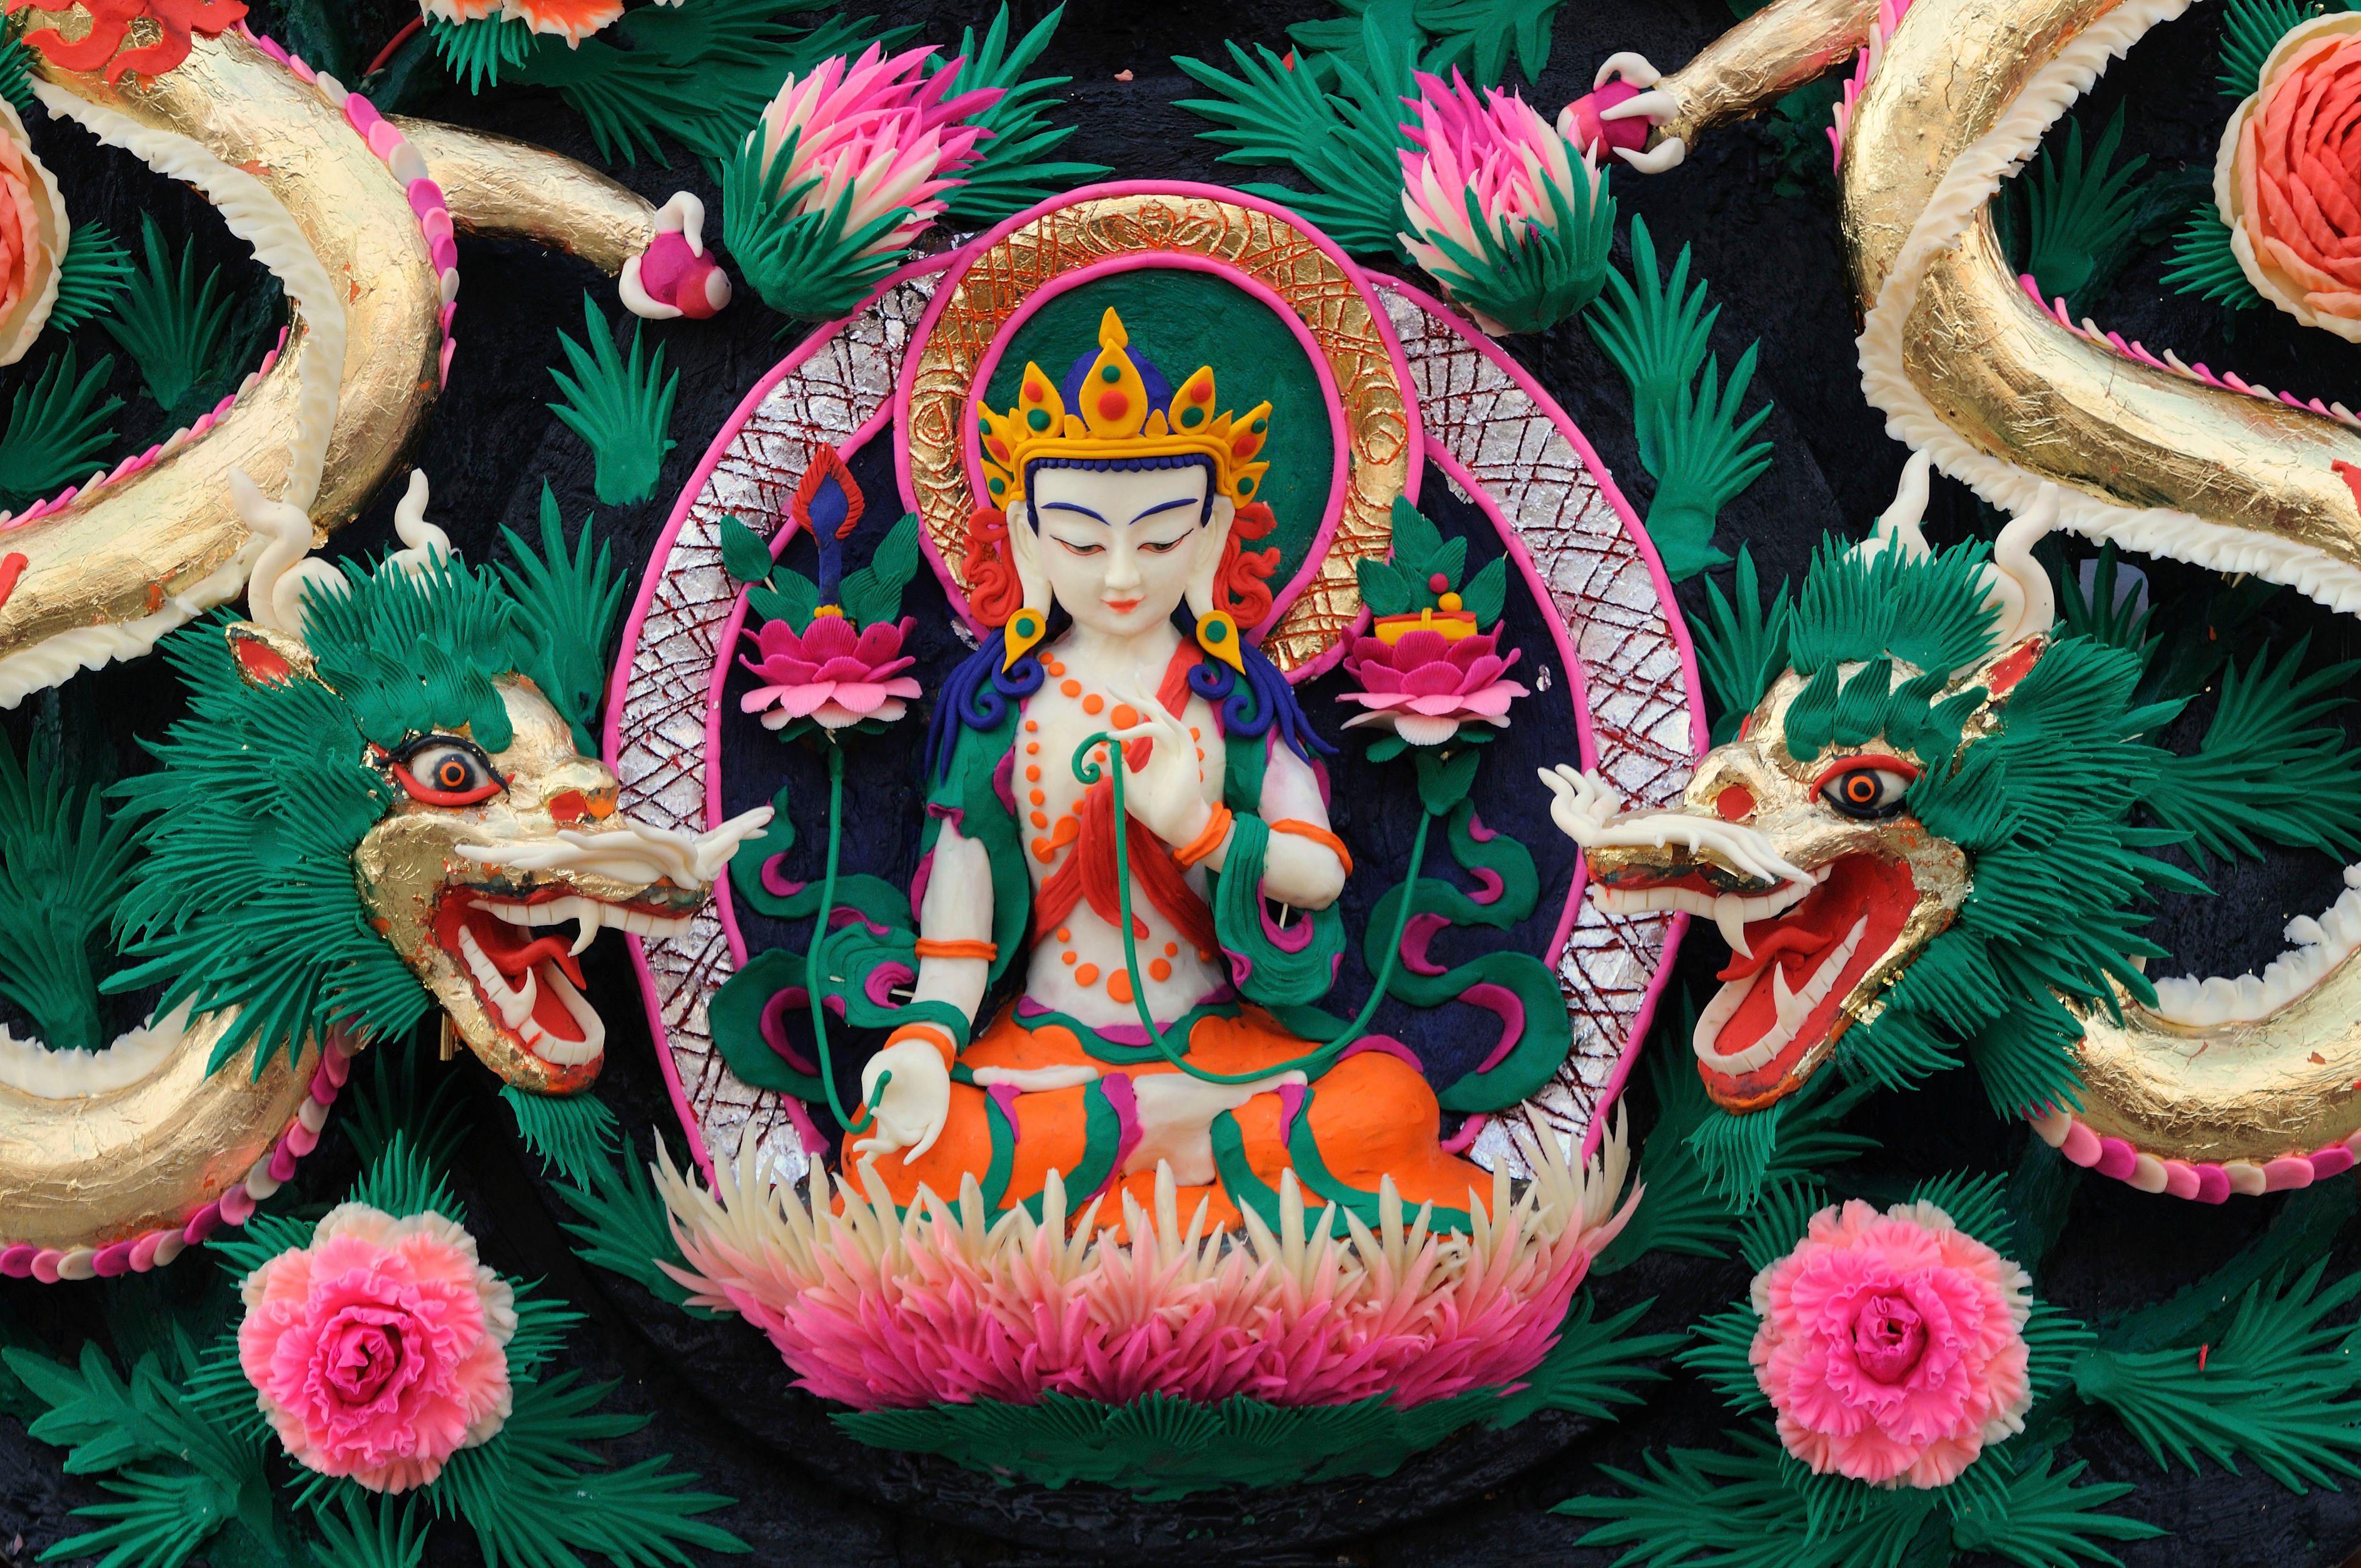 Tibet's butter sculptures are particularly colorful and striking.